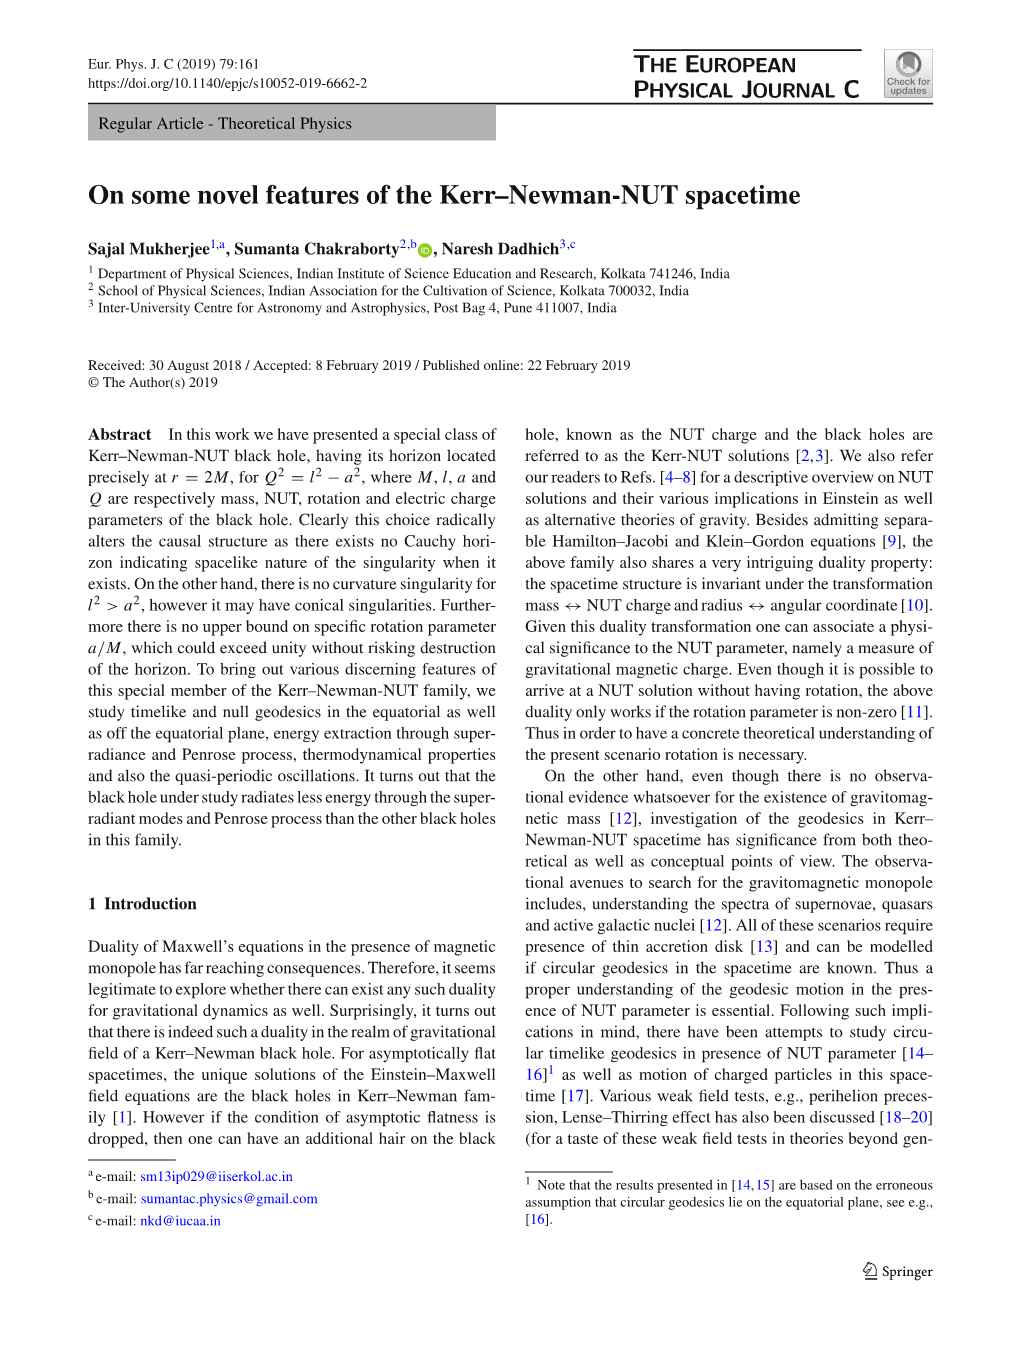 On Some Novel Features of the Kerr–Newman-NUT Spacetime